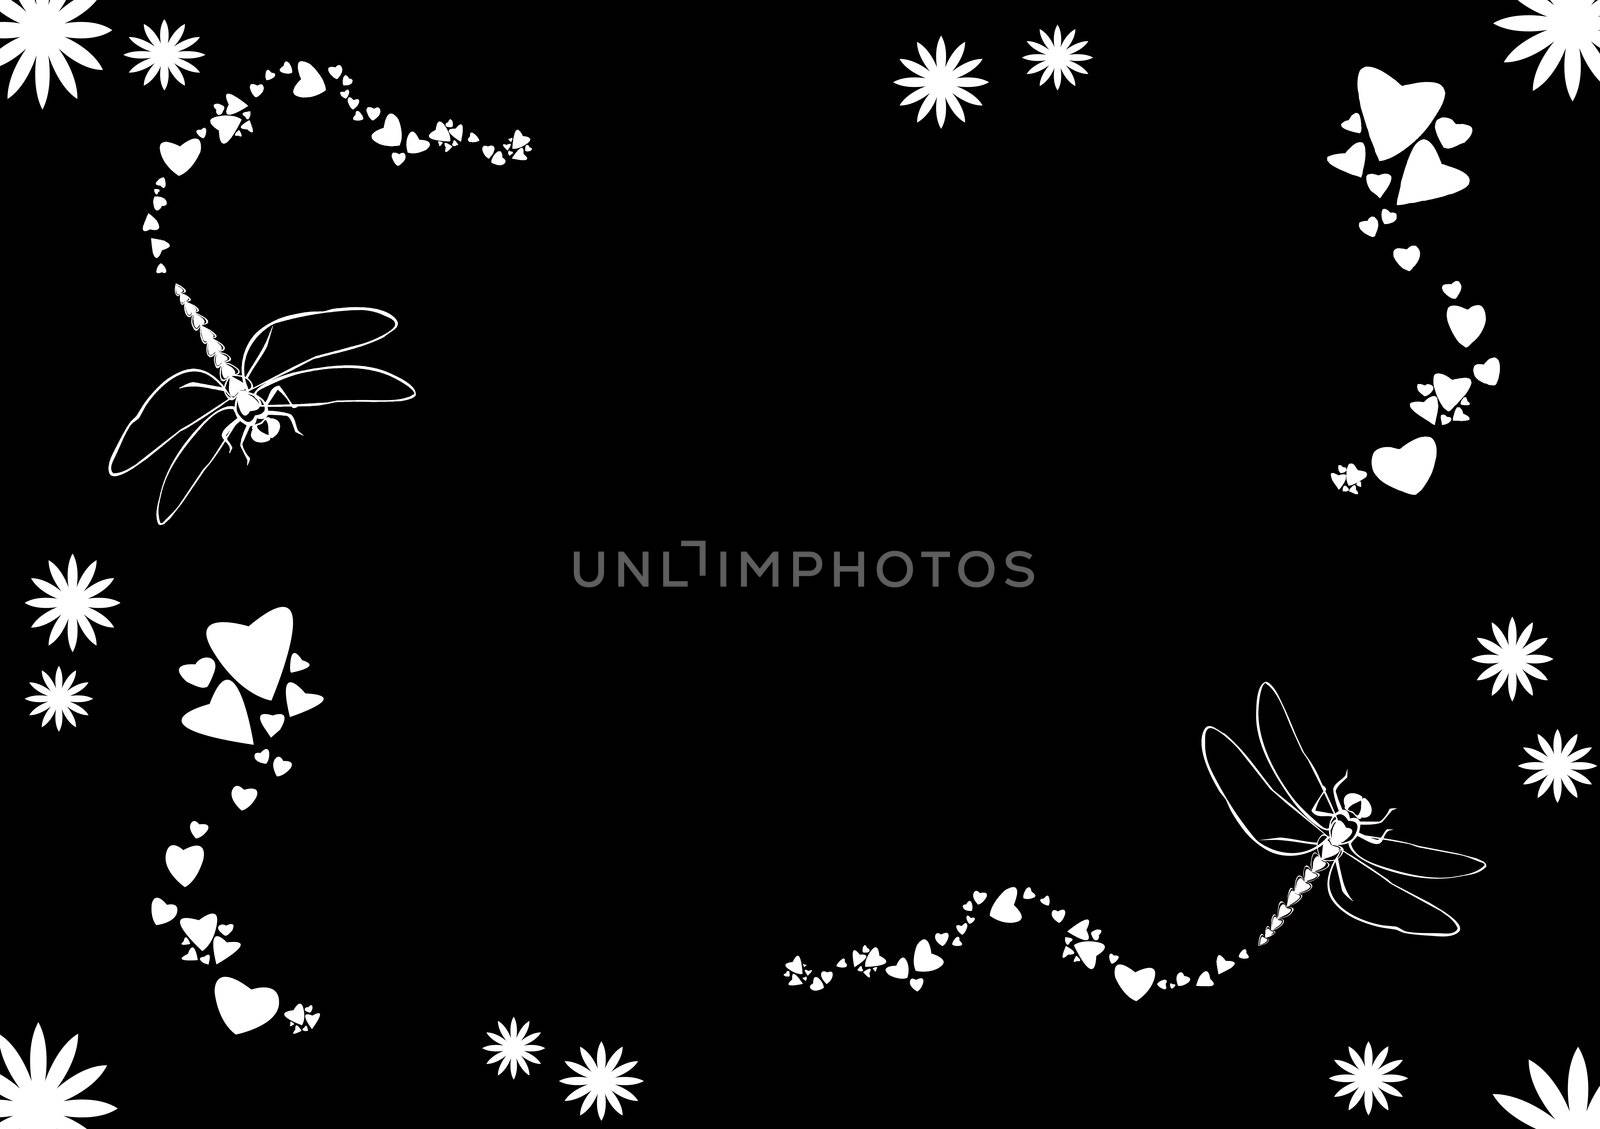 Black and white dragonflies: Original illustration of dragonflies made of red heart shapes with trail of hearts showing fly path.